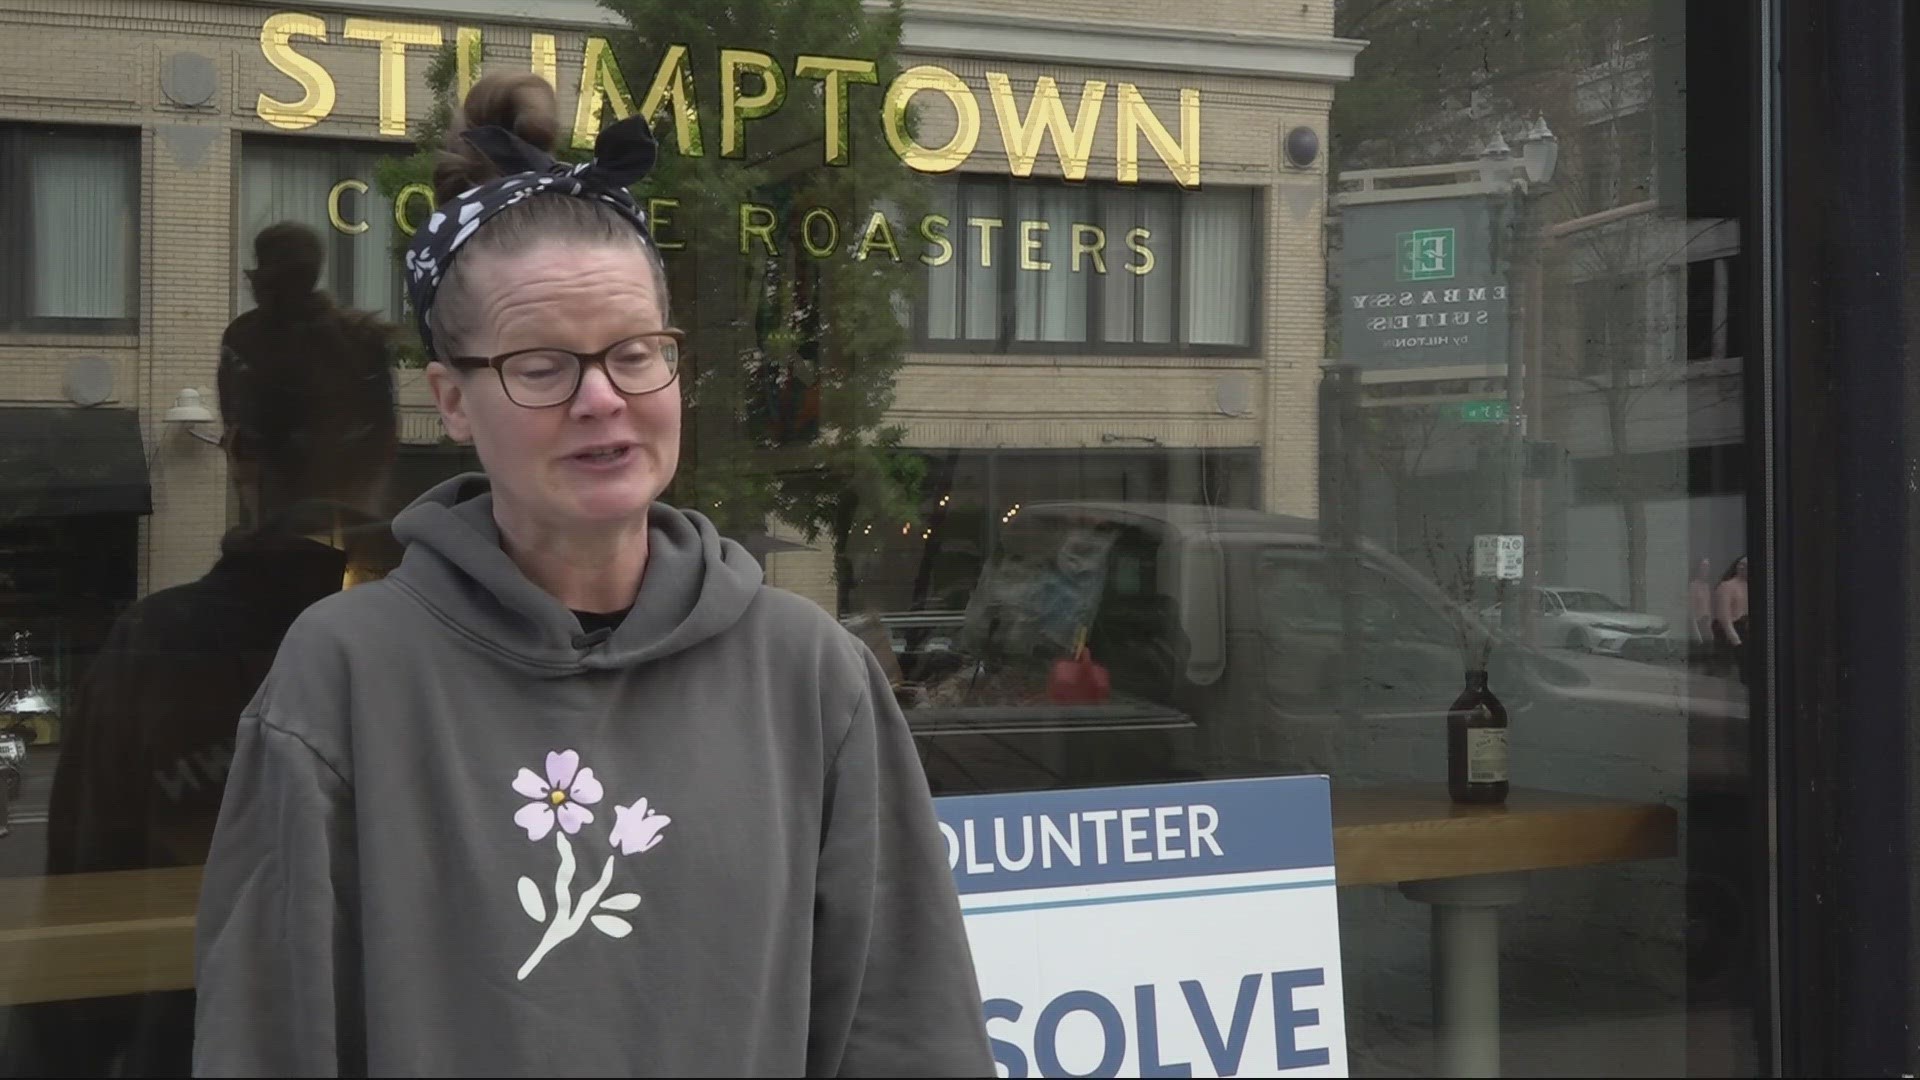 Stumptown Coffee Roasters teamed up with SOLVE, an environmental nonprofit, to host a cleanup downtown.